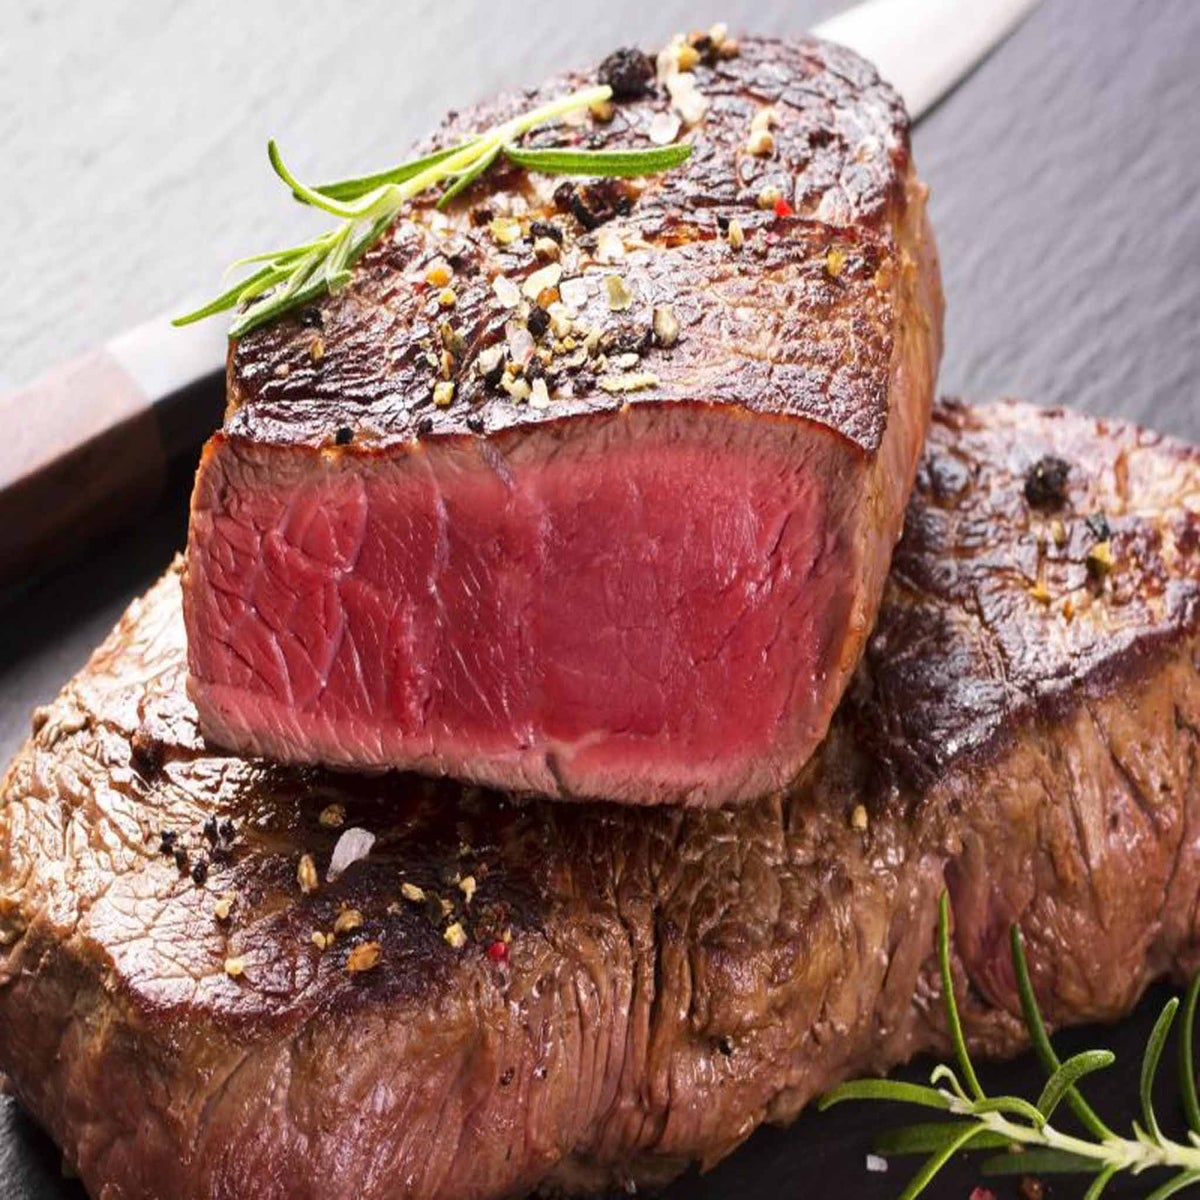 People Should Eat More Filet Mignon, It's an Affordable Luxury